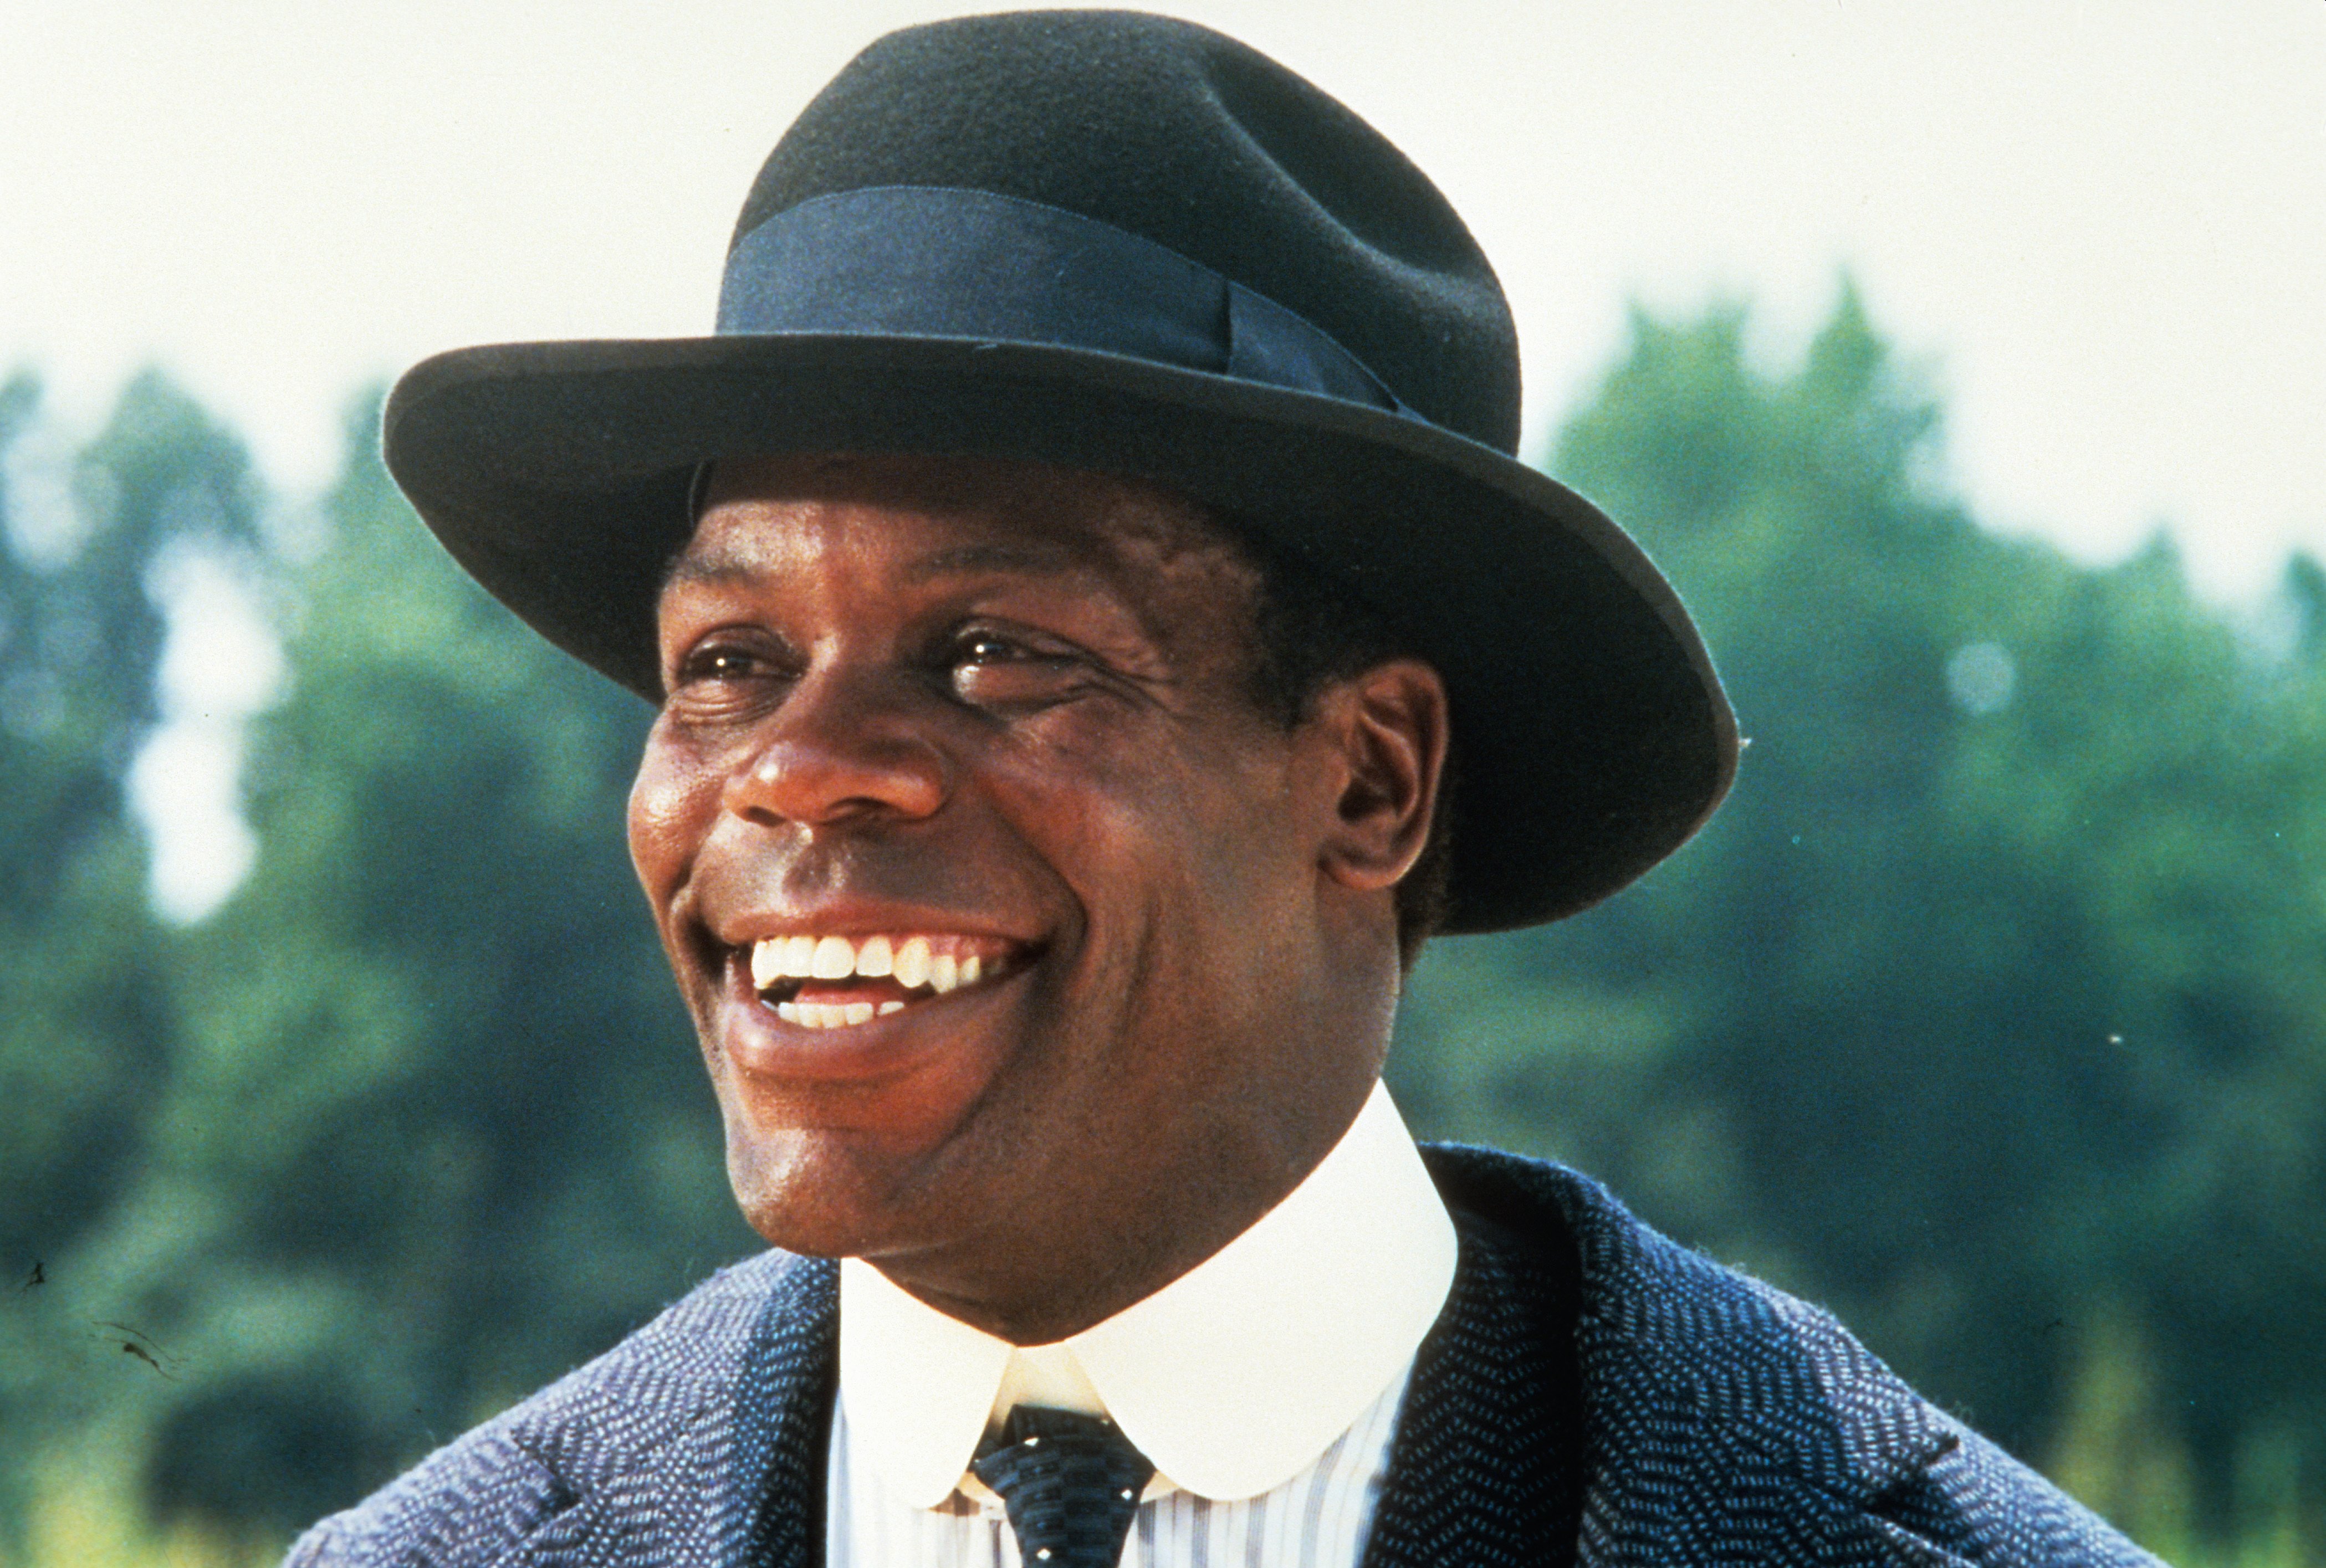 Danny Glover in a scene from the film "The Color Purple," 1985. | Source: Warner Brothers/Getty Images